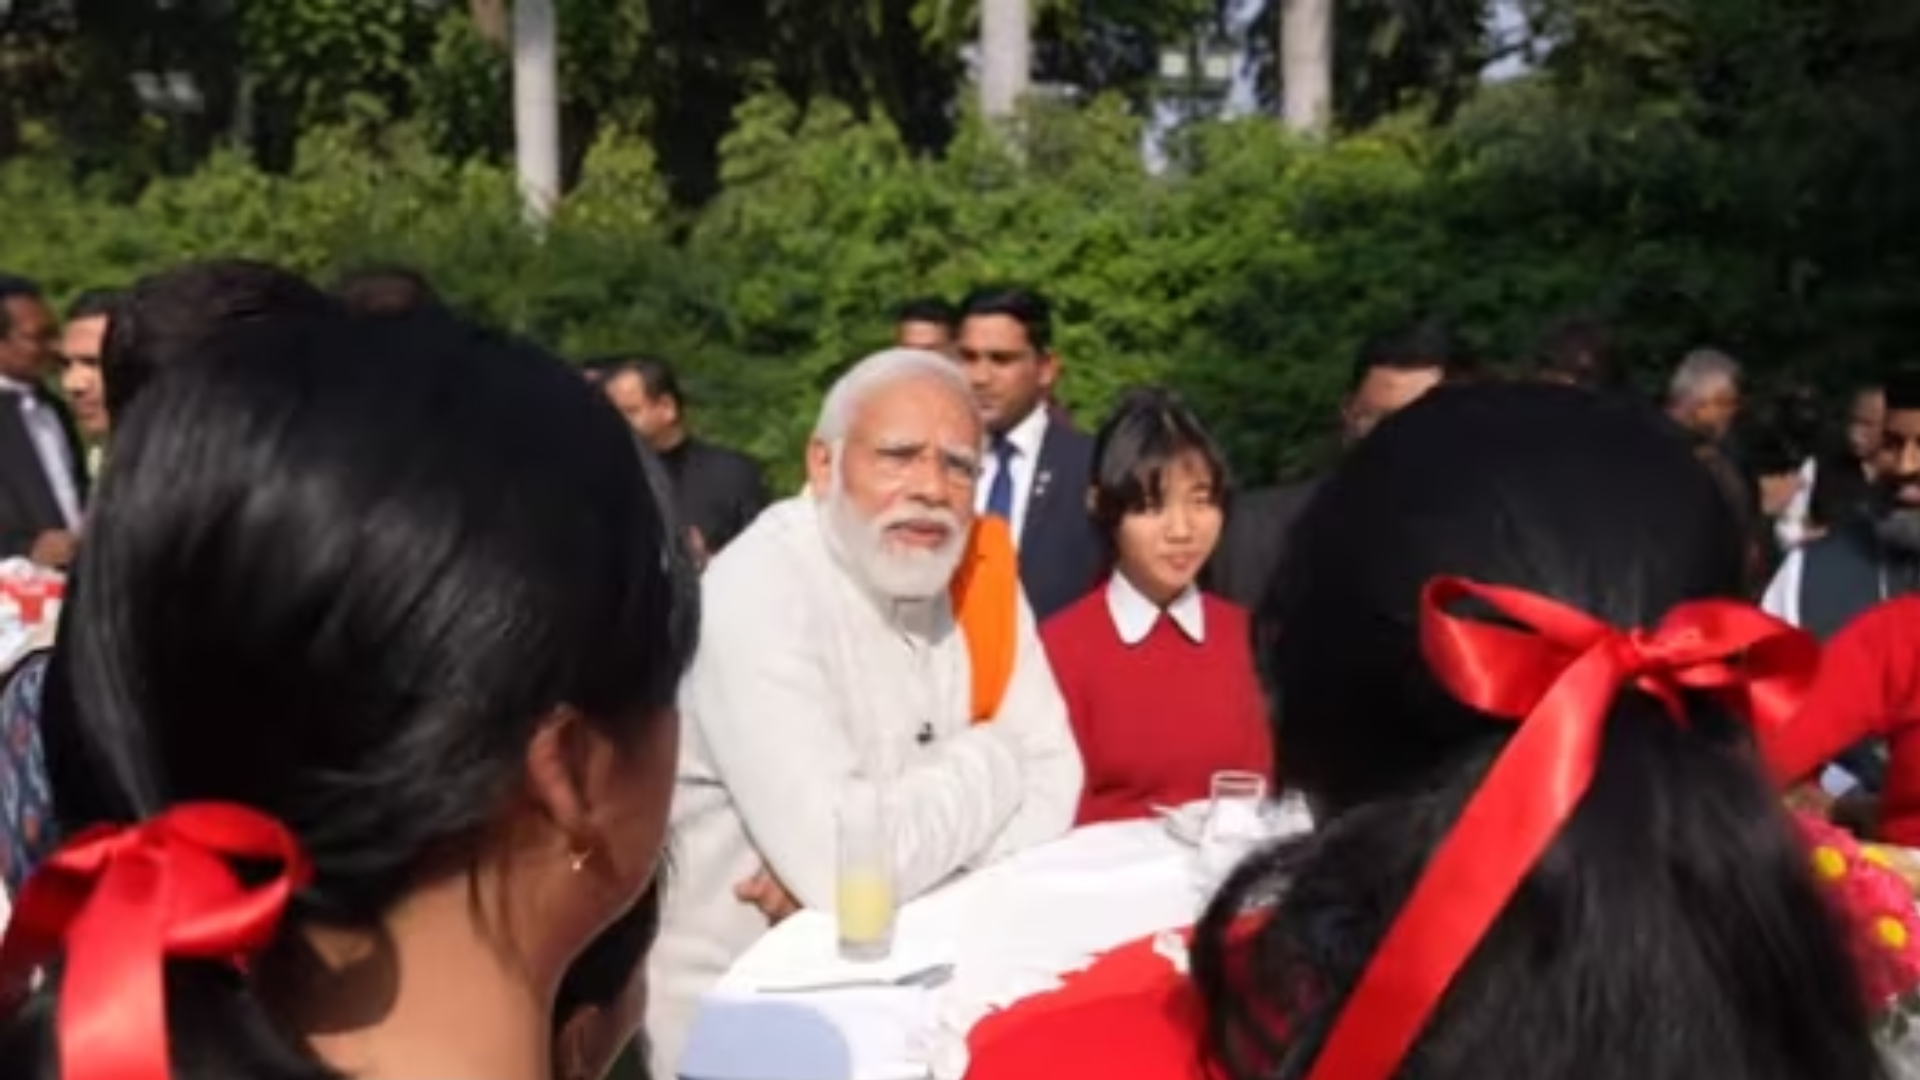 PM Narendra Modi shares video of students’ tour of his office